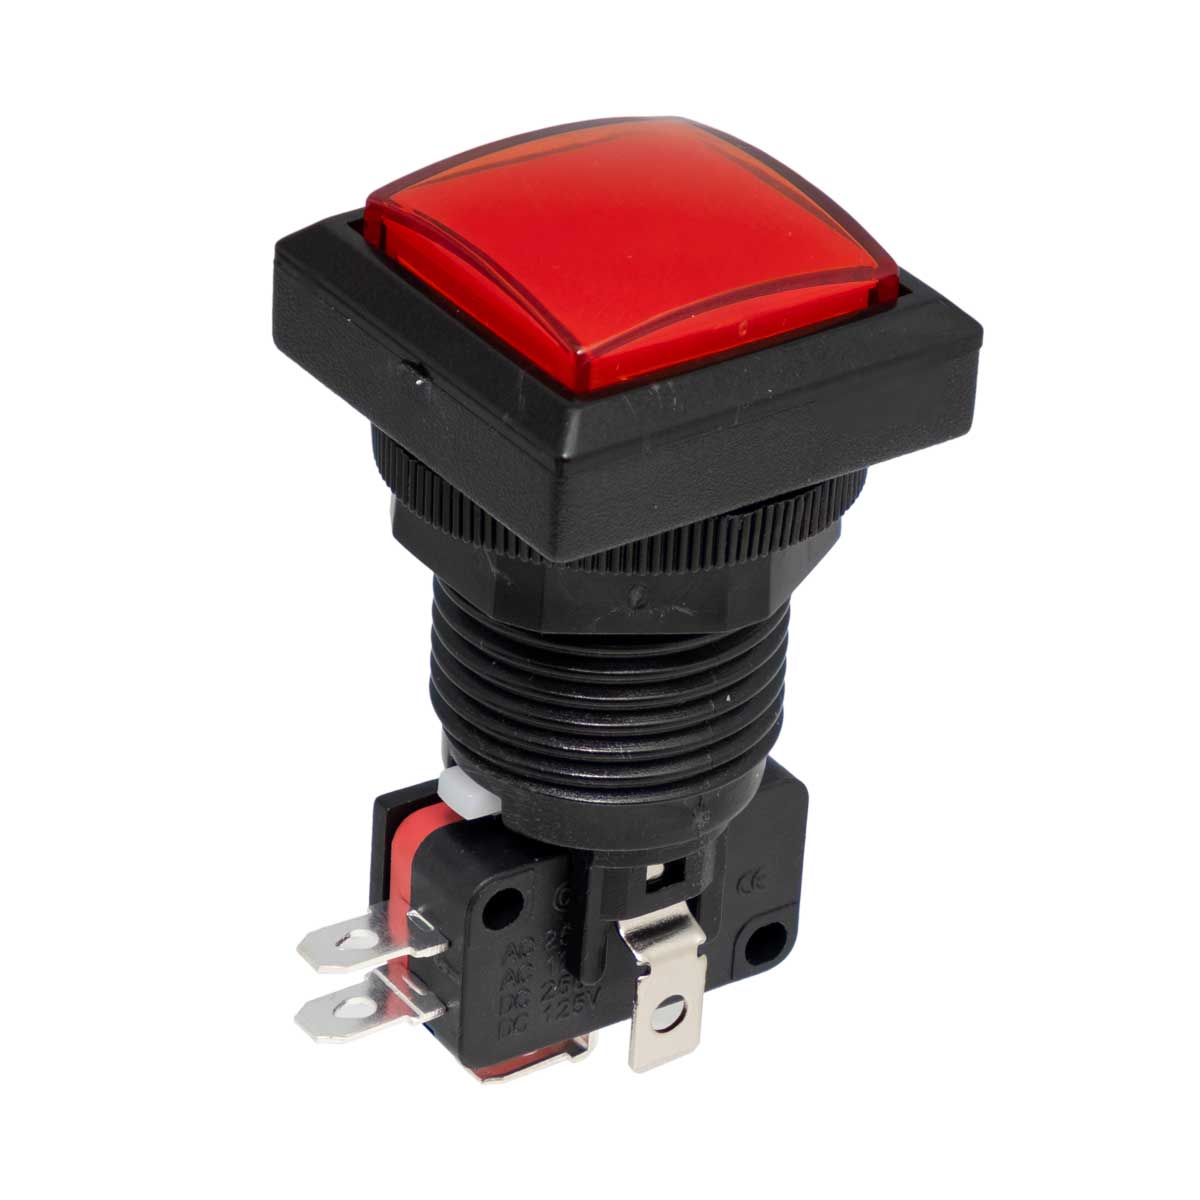 Arcade pushbutton with red LED, 25x25mm, Ø24mm, 16A/250V AC